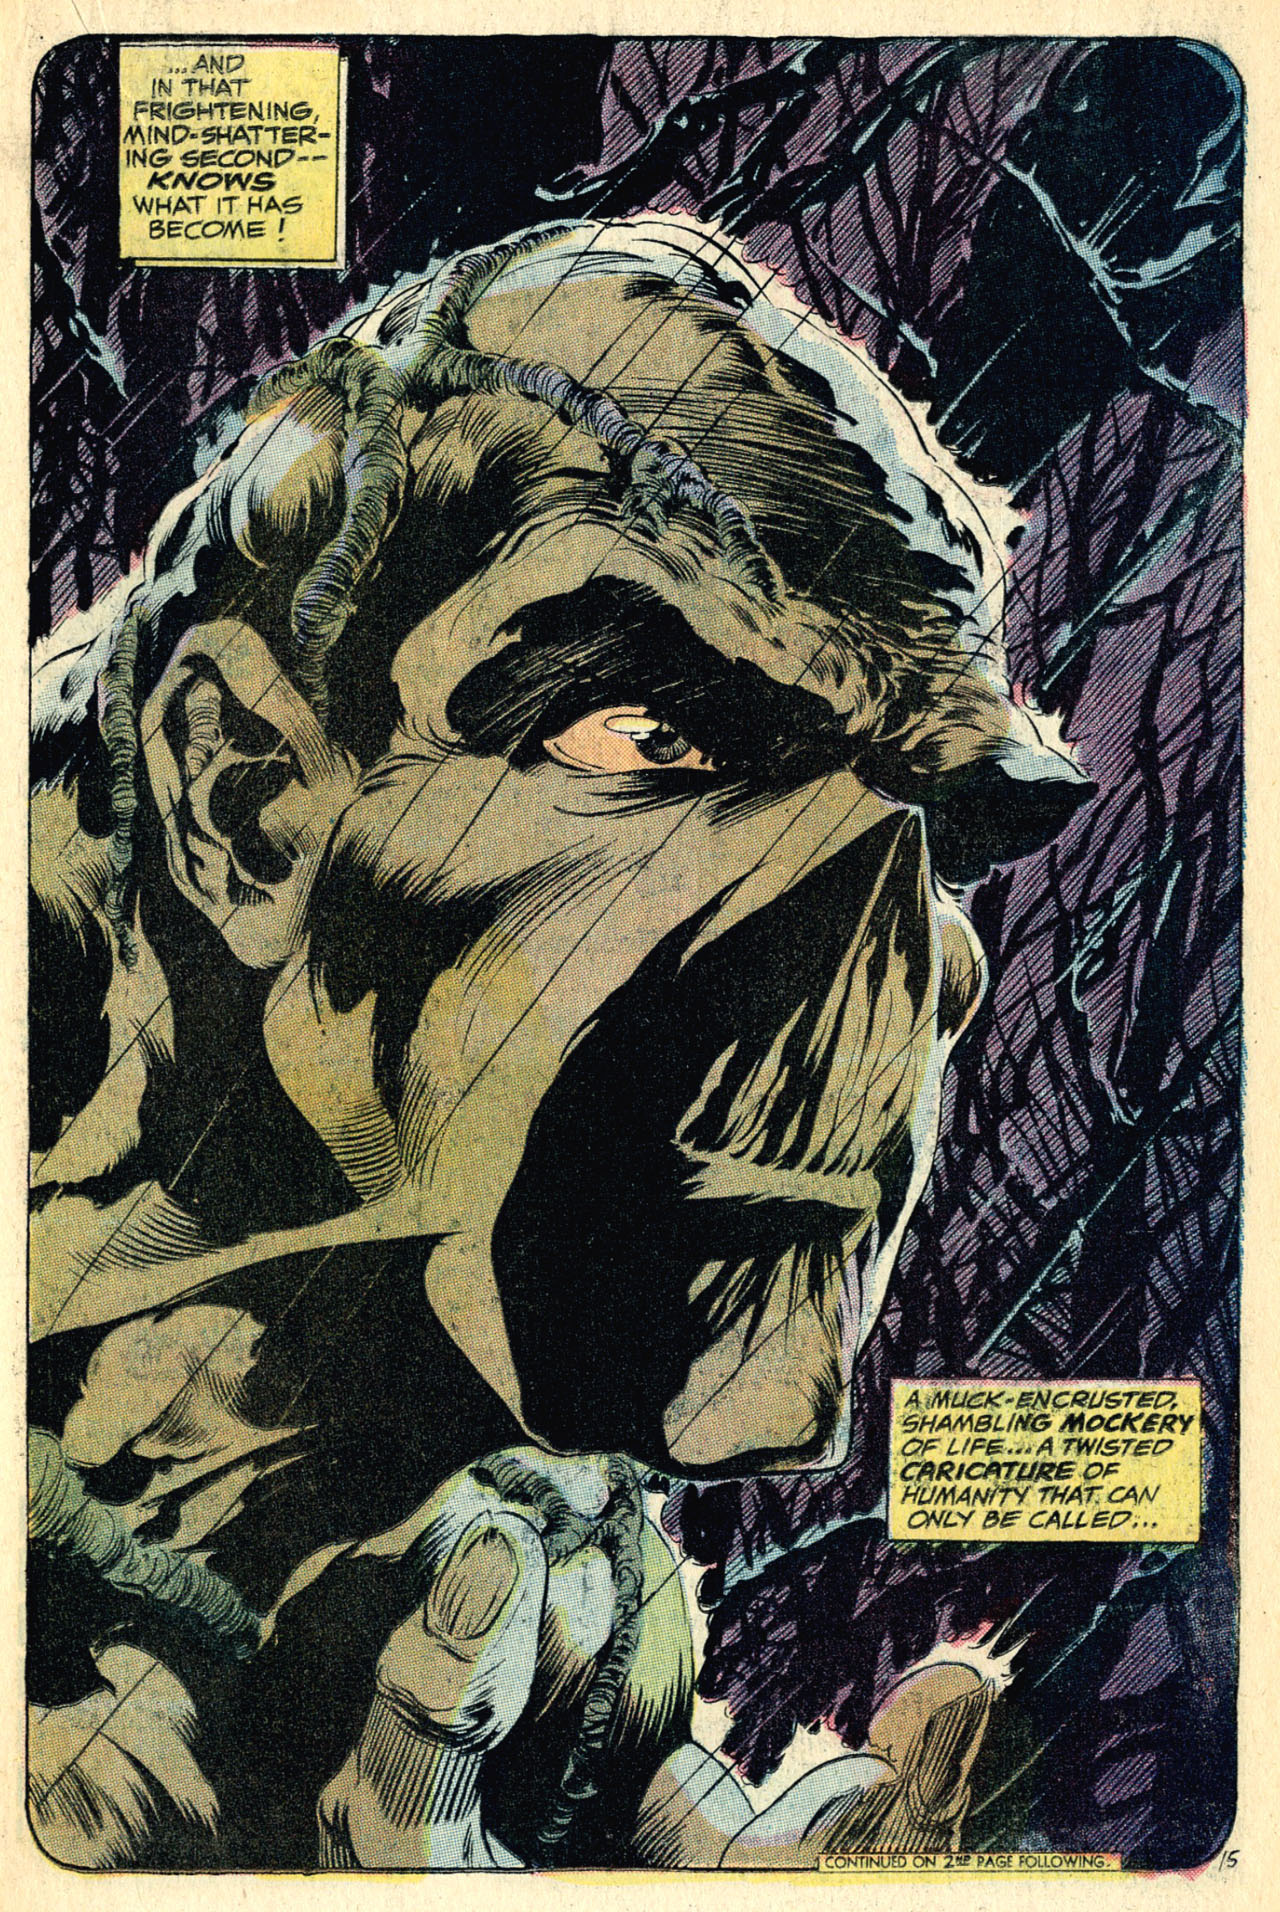 The Swamp Thing, by Len Wein and Bernie Wrightson